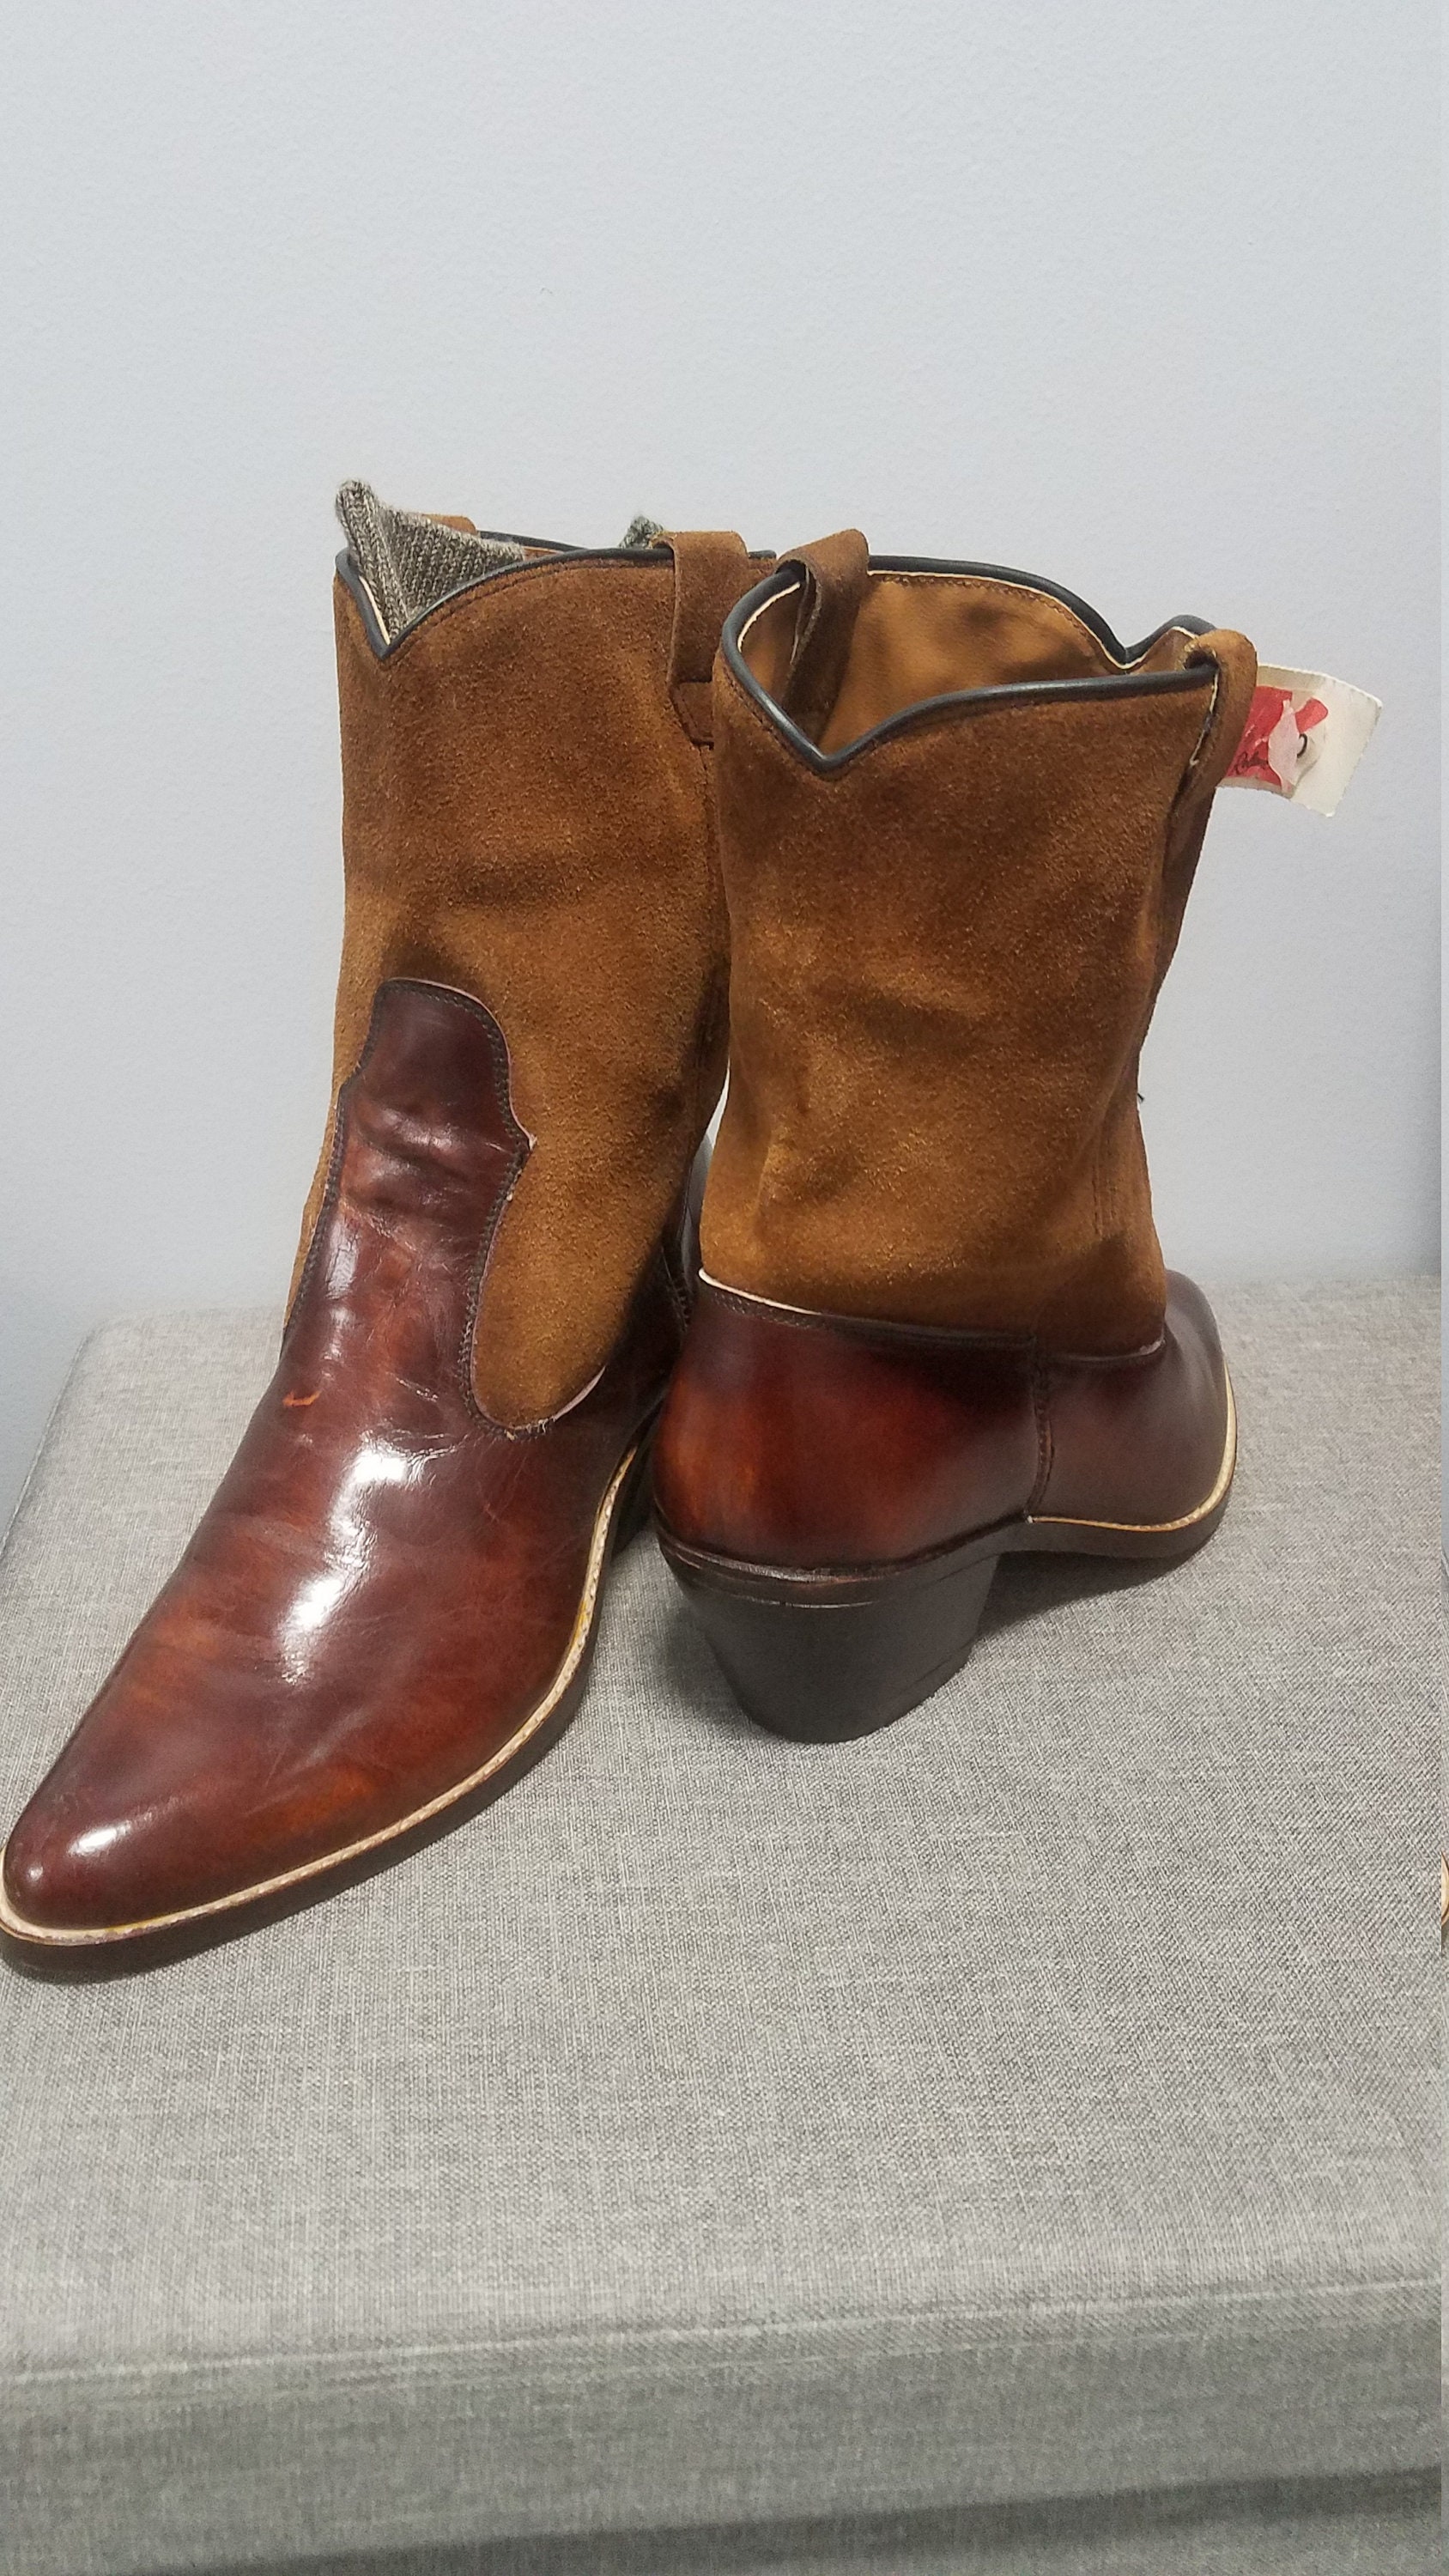 Bostonian Boots Men's Or. Made in Spain. 60's or 70's. Never Worn ...